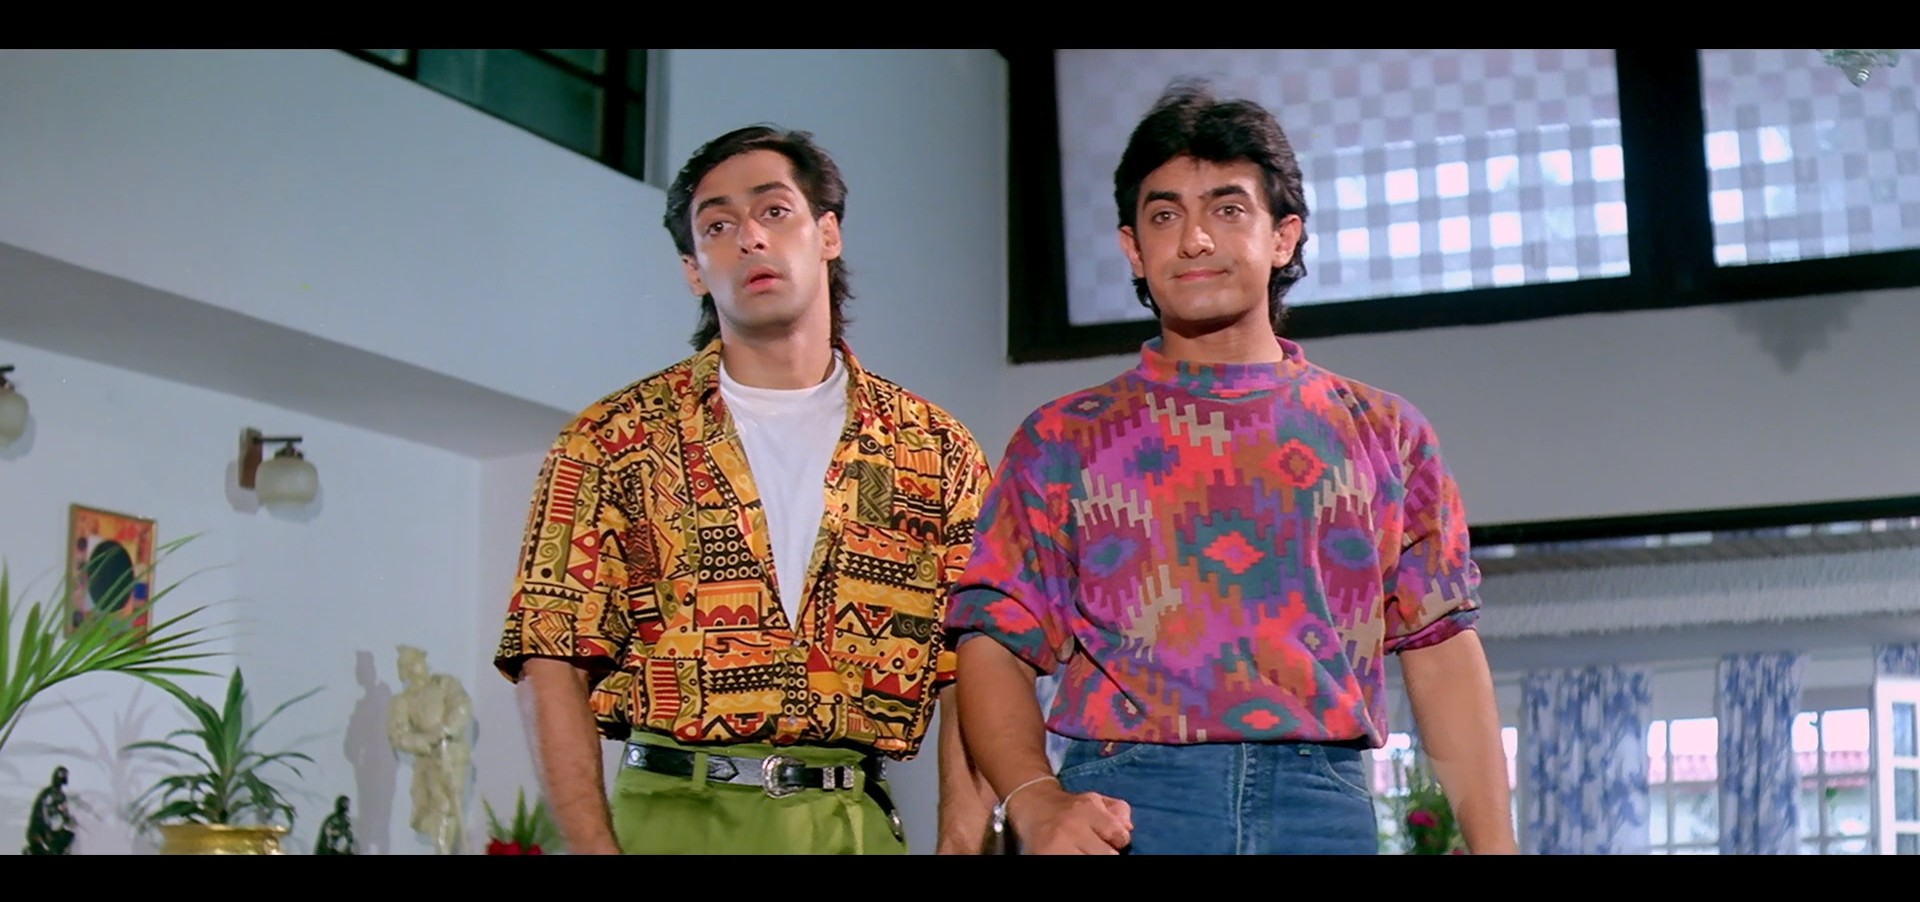 Amar and Prem in colourful tees looking constipated